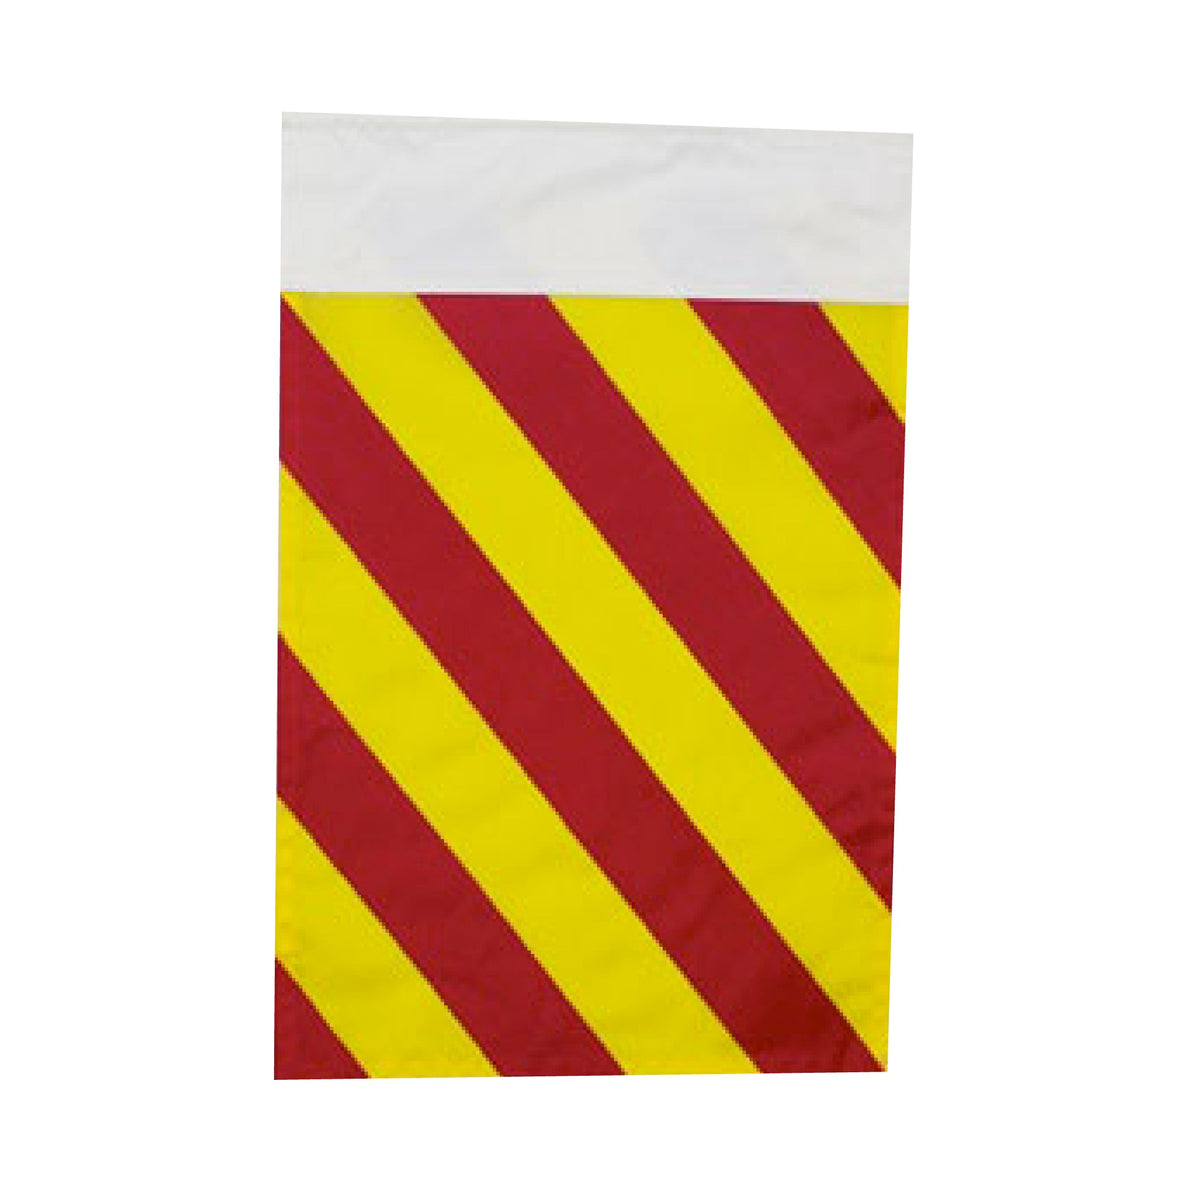 International Code of Signals - Size 3-Flag-Fly Me Flag